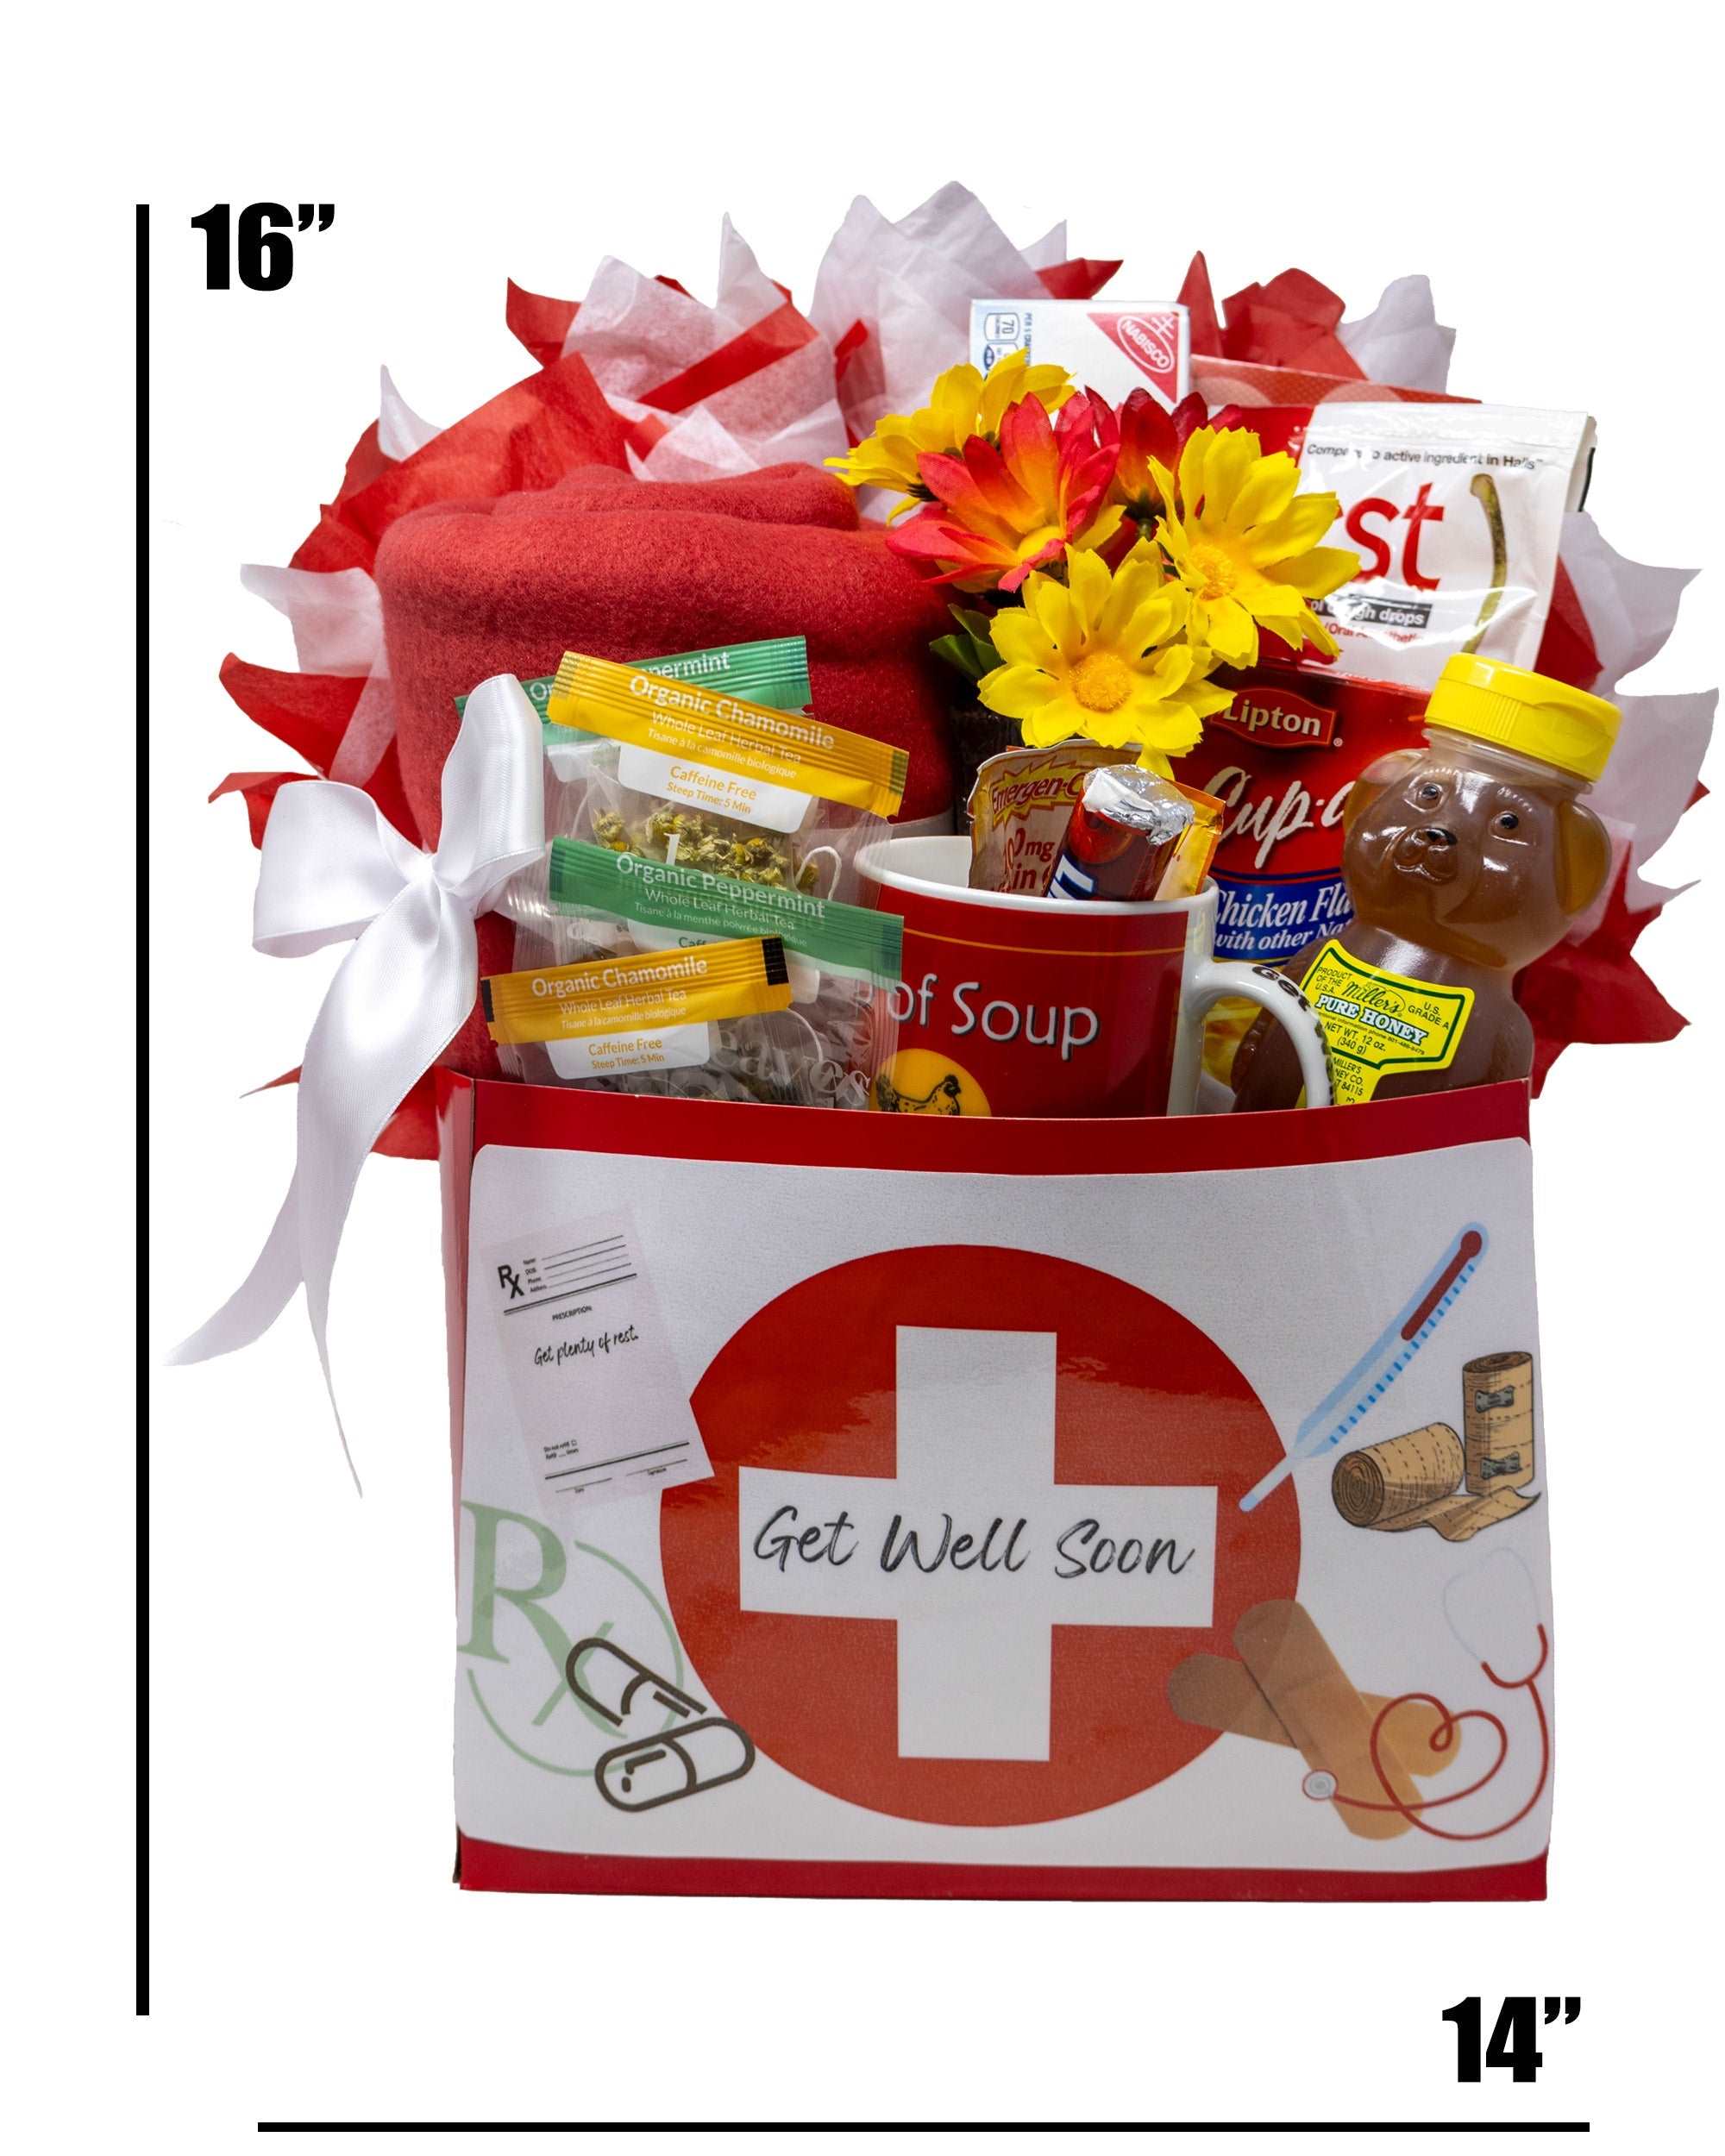 GET WELL SOON FEEL BETTER CARE PACKAGE- Nostalgic Decade Candies GIFT BOX -  Fun Gag Gift Basket For Boy or Girl - PERFECT For Adults, College Students,  Friend, Teens, Man or Woman -